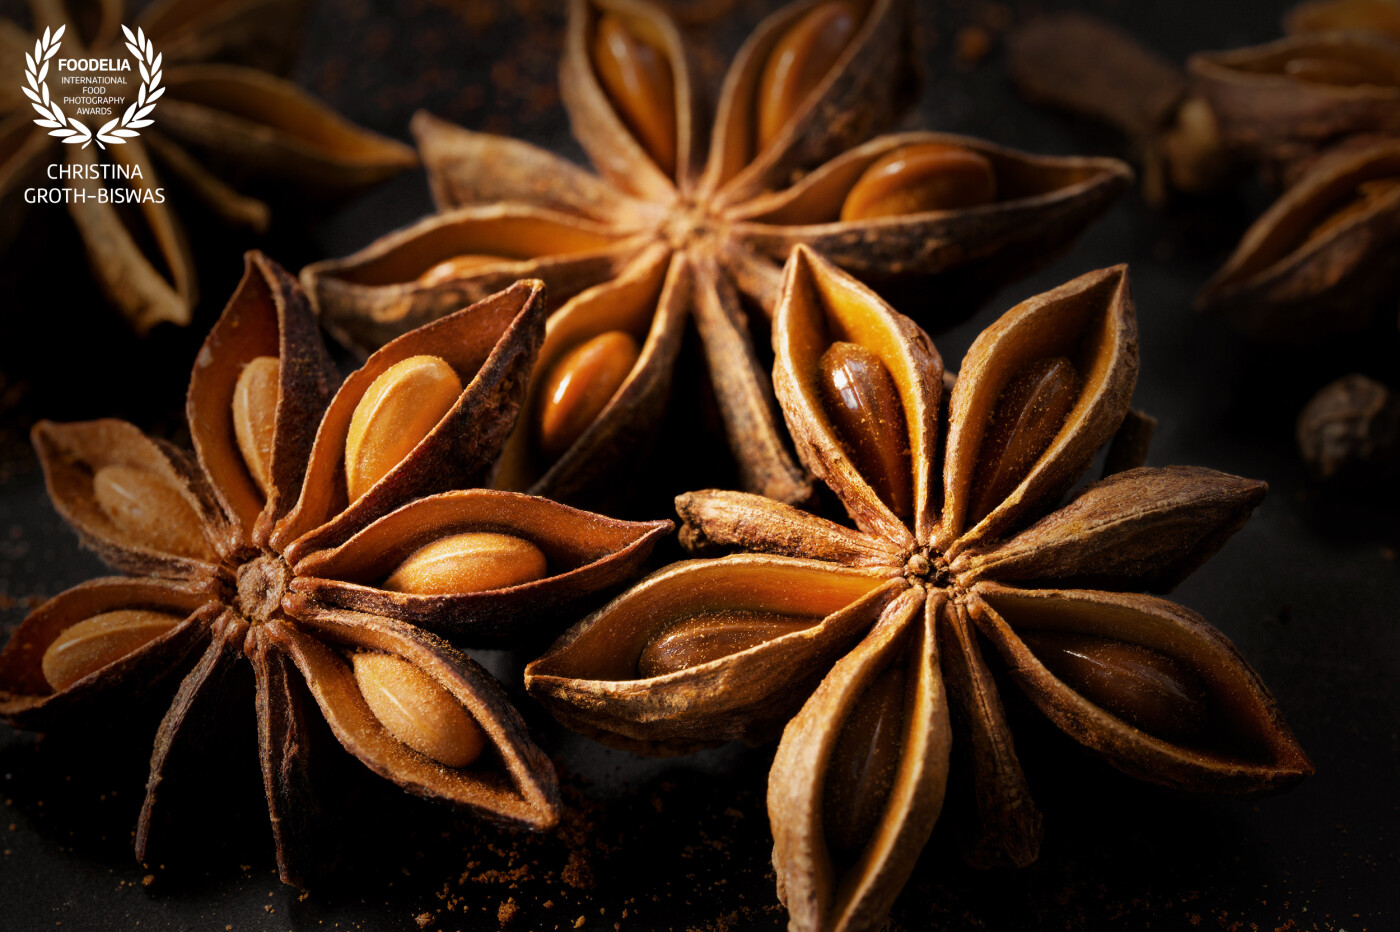 While I was preparing some spice mixes for a few Indian dishes that I wanted to make, I had the idea of taking a few close-ups of the spices to show their beauty. This picture is one of them, certainly from the looks, one of my favourite spices: star anise.